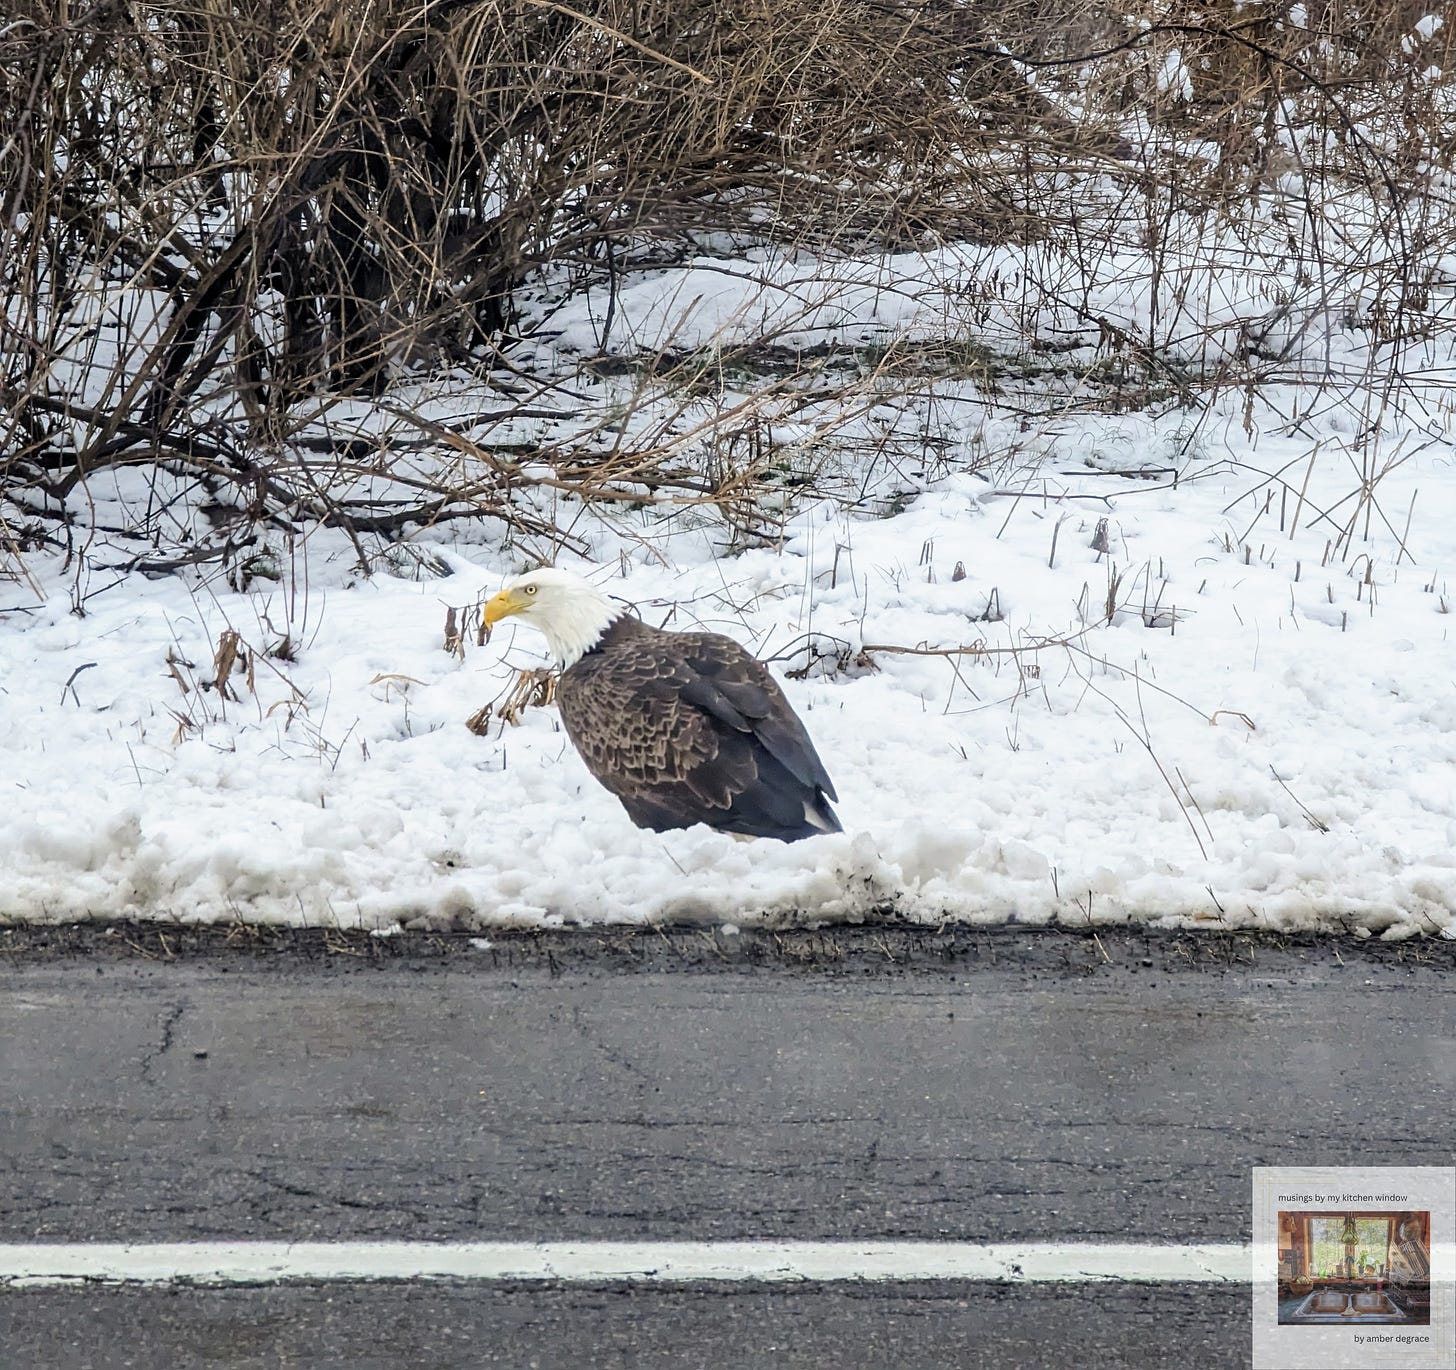 A bald eagle stands in the snow by the side of the road in Montezuma National Wildlife Refuge, NY.